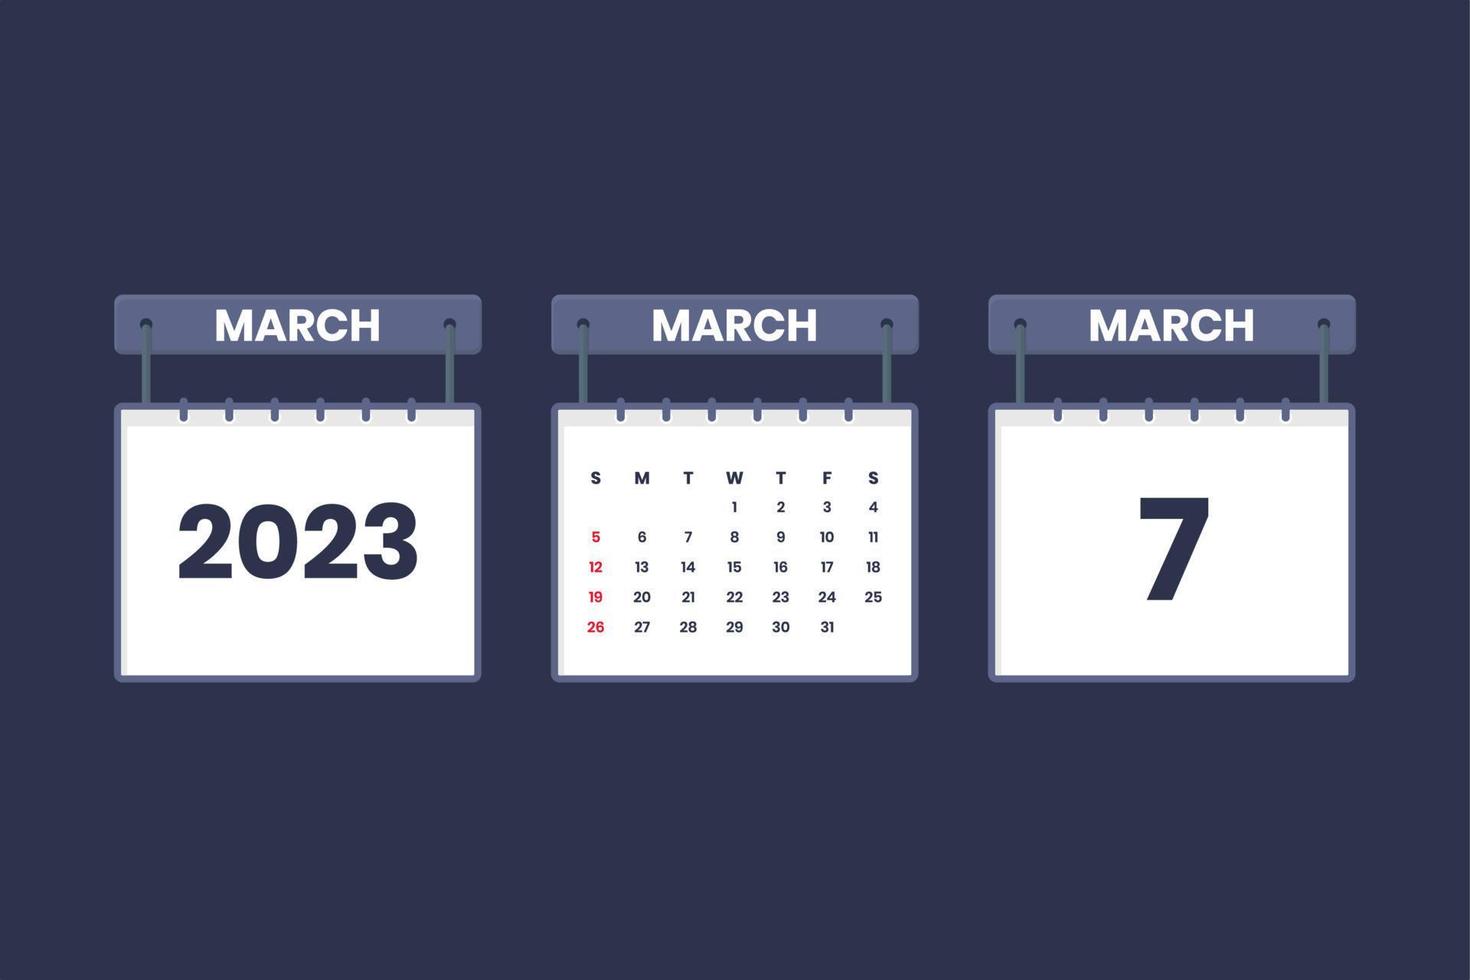 7 March 2023 calendar icon for schedule, appointment, important date concept vector